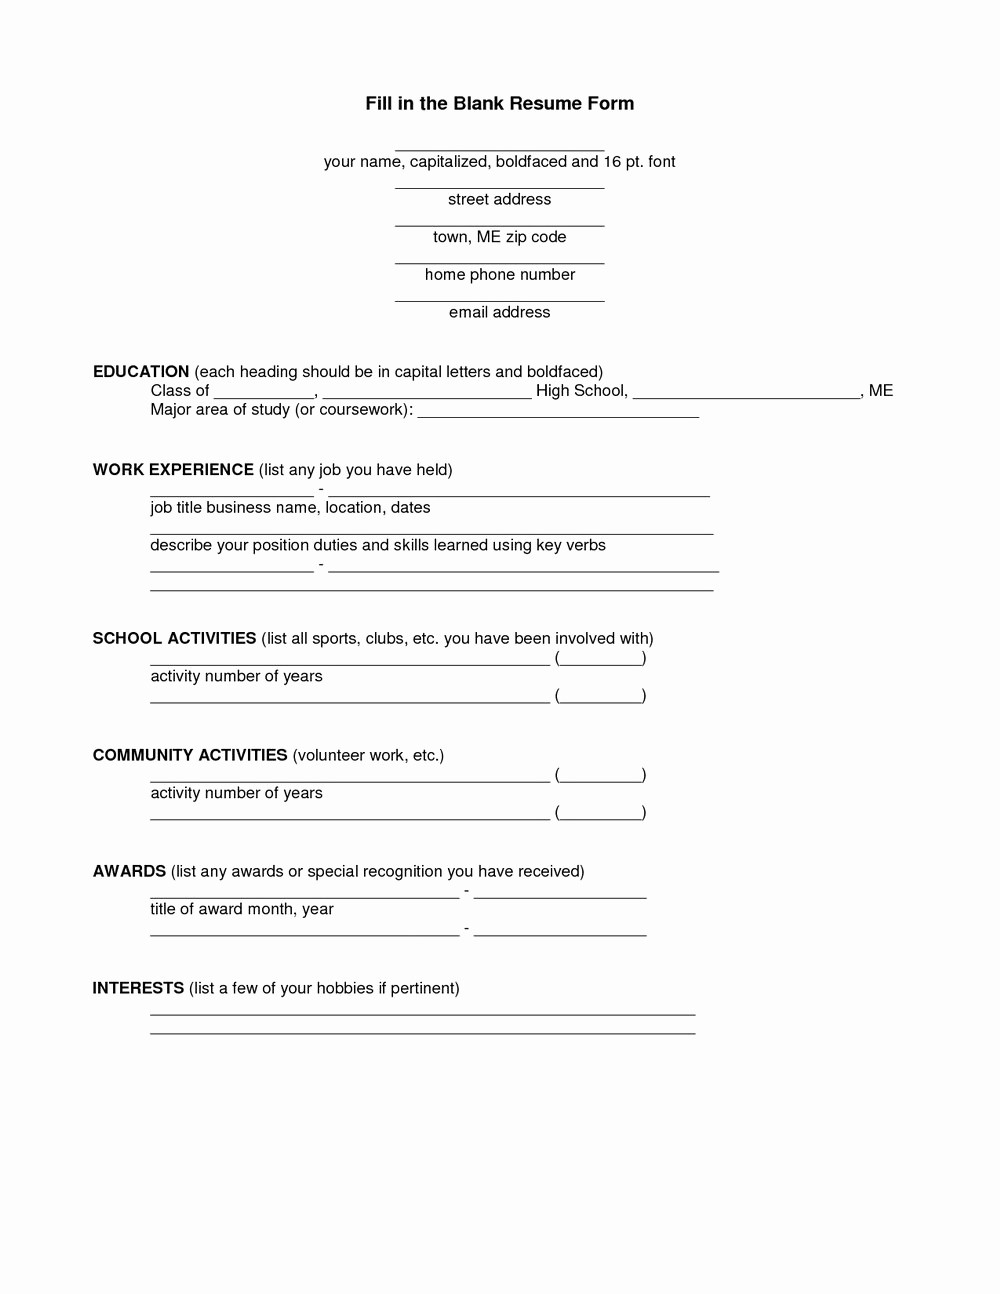 Resume forms to Fill Out Best Of Blank Resume form to Fill Out Resumes 1046